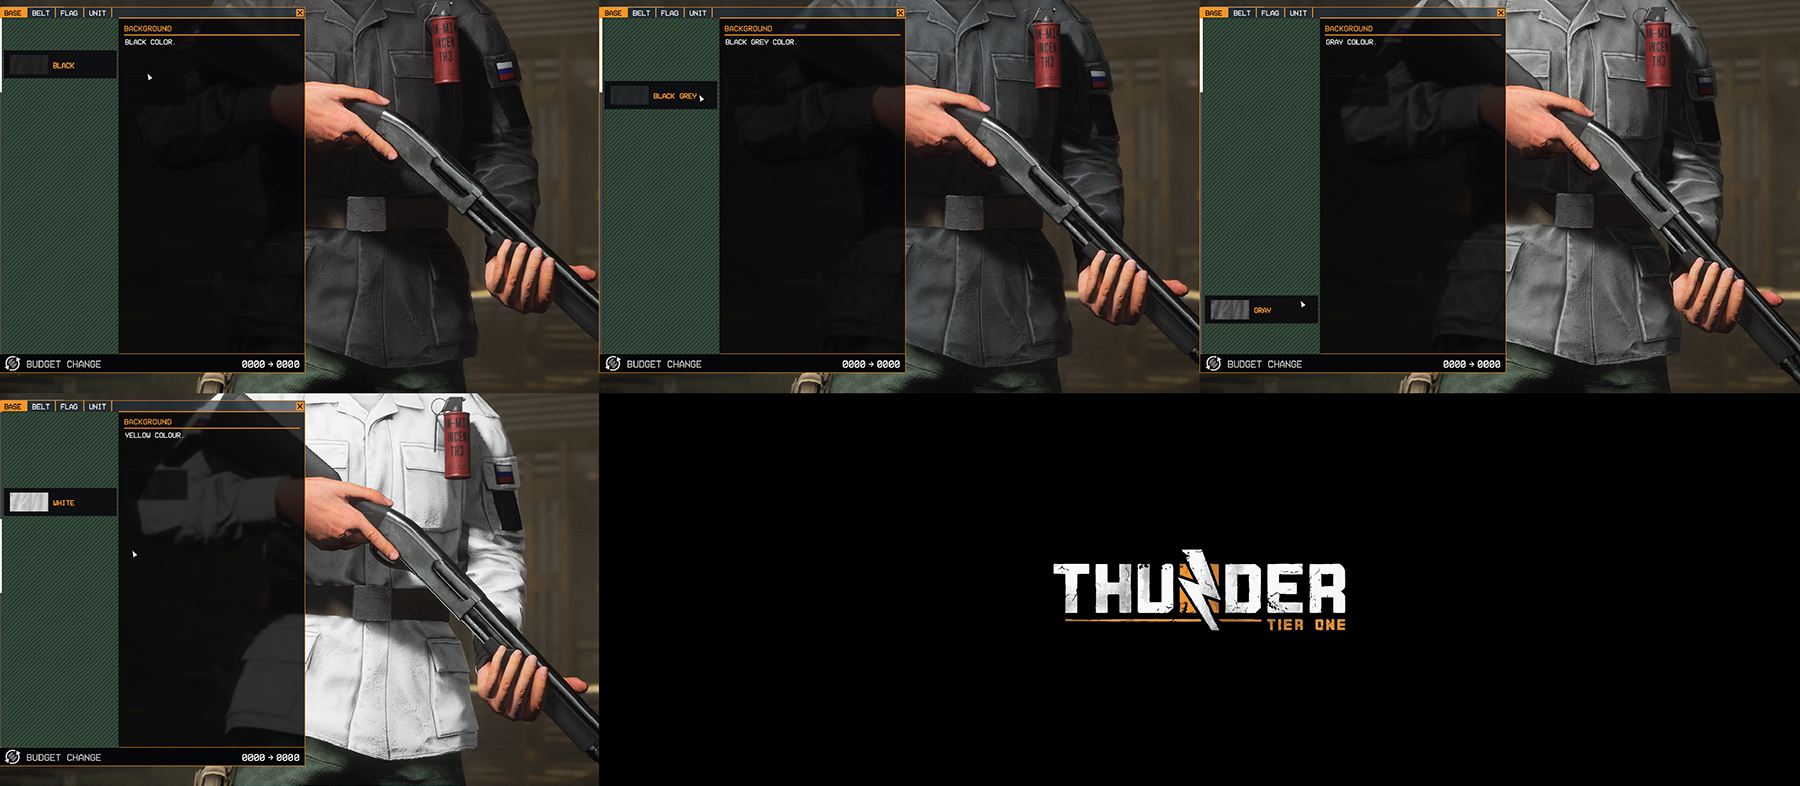 Thunder Tier One Customization and Unlocks guide (with Pictures) - Camos, colors - 6184FB9